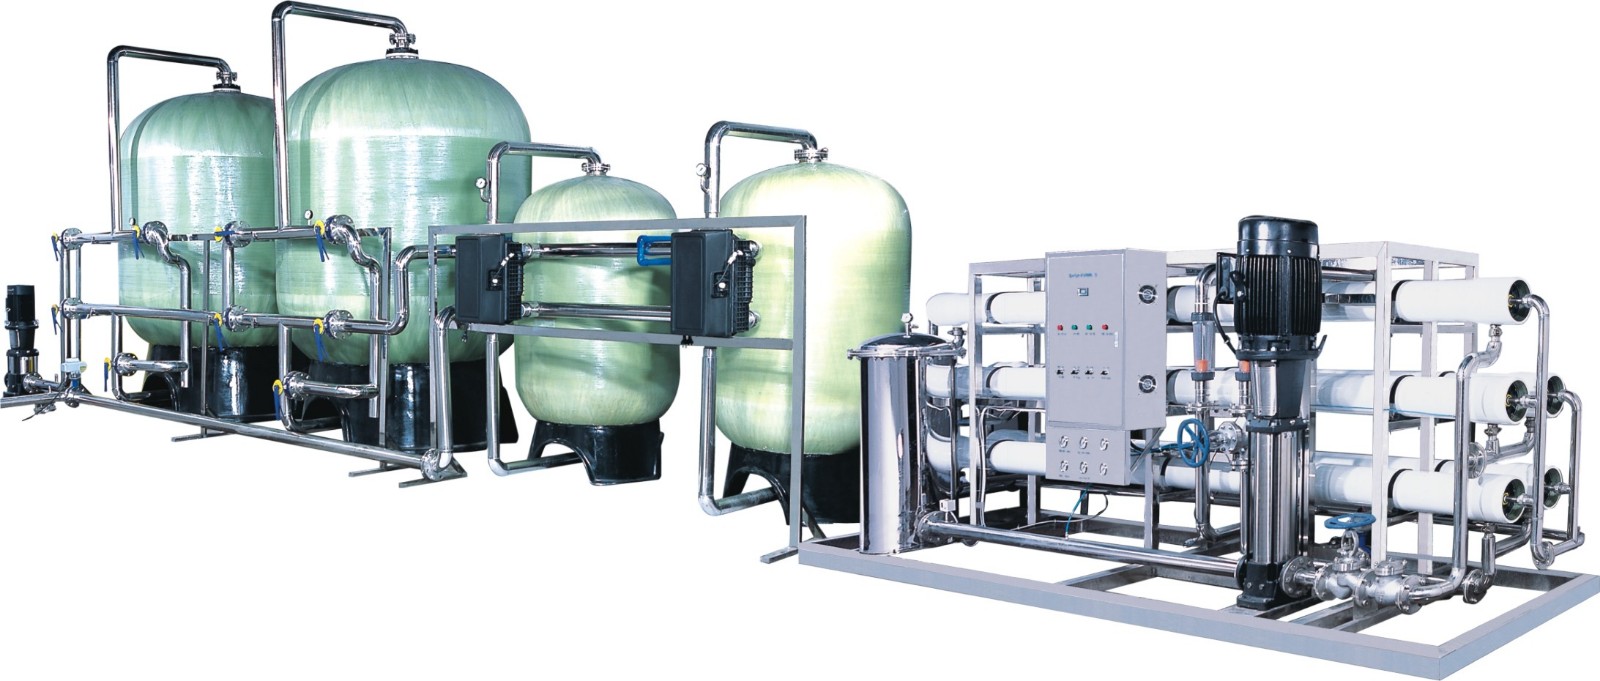 EcoPura 8000lh water treatment machine manufacturers solution expert for water treatment